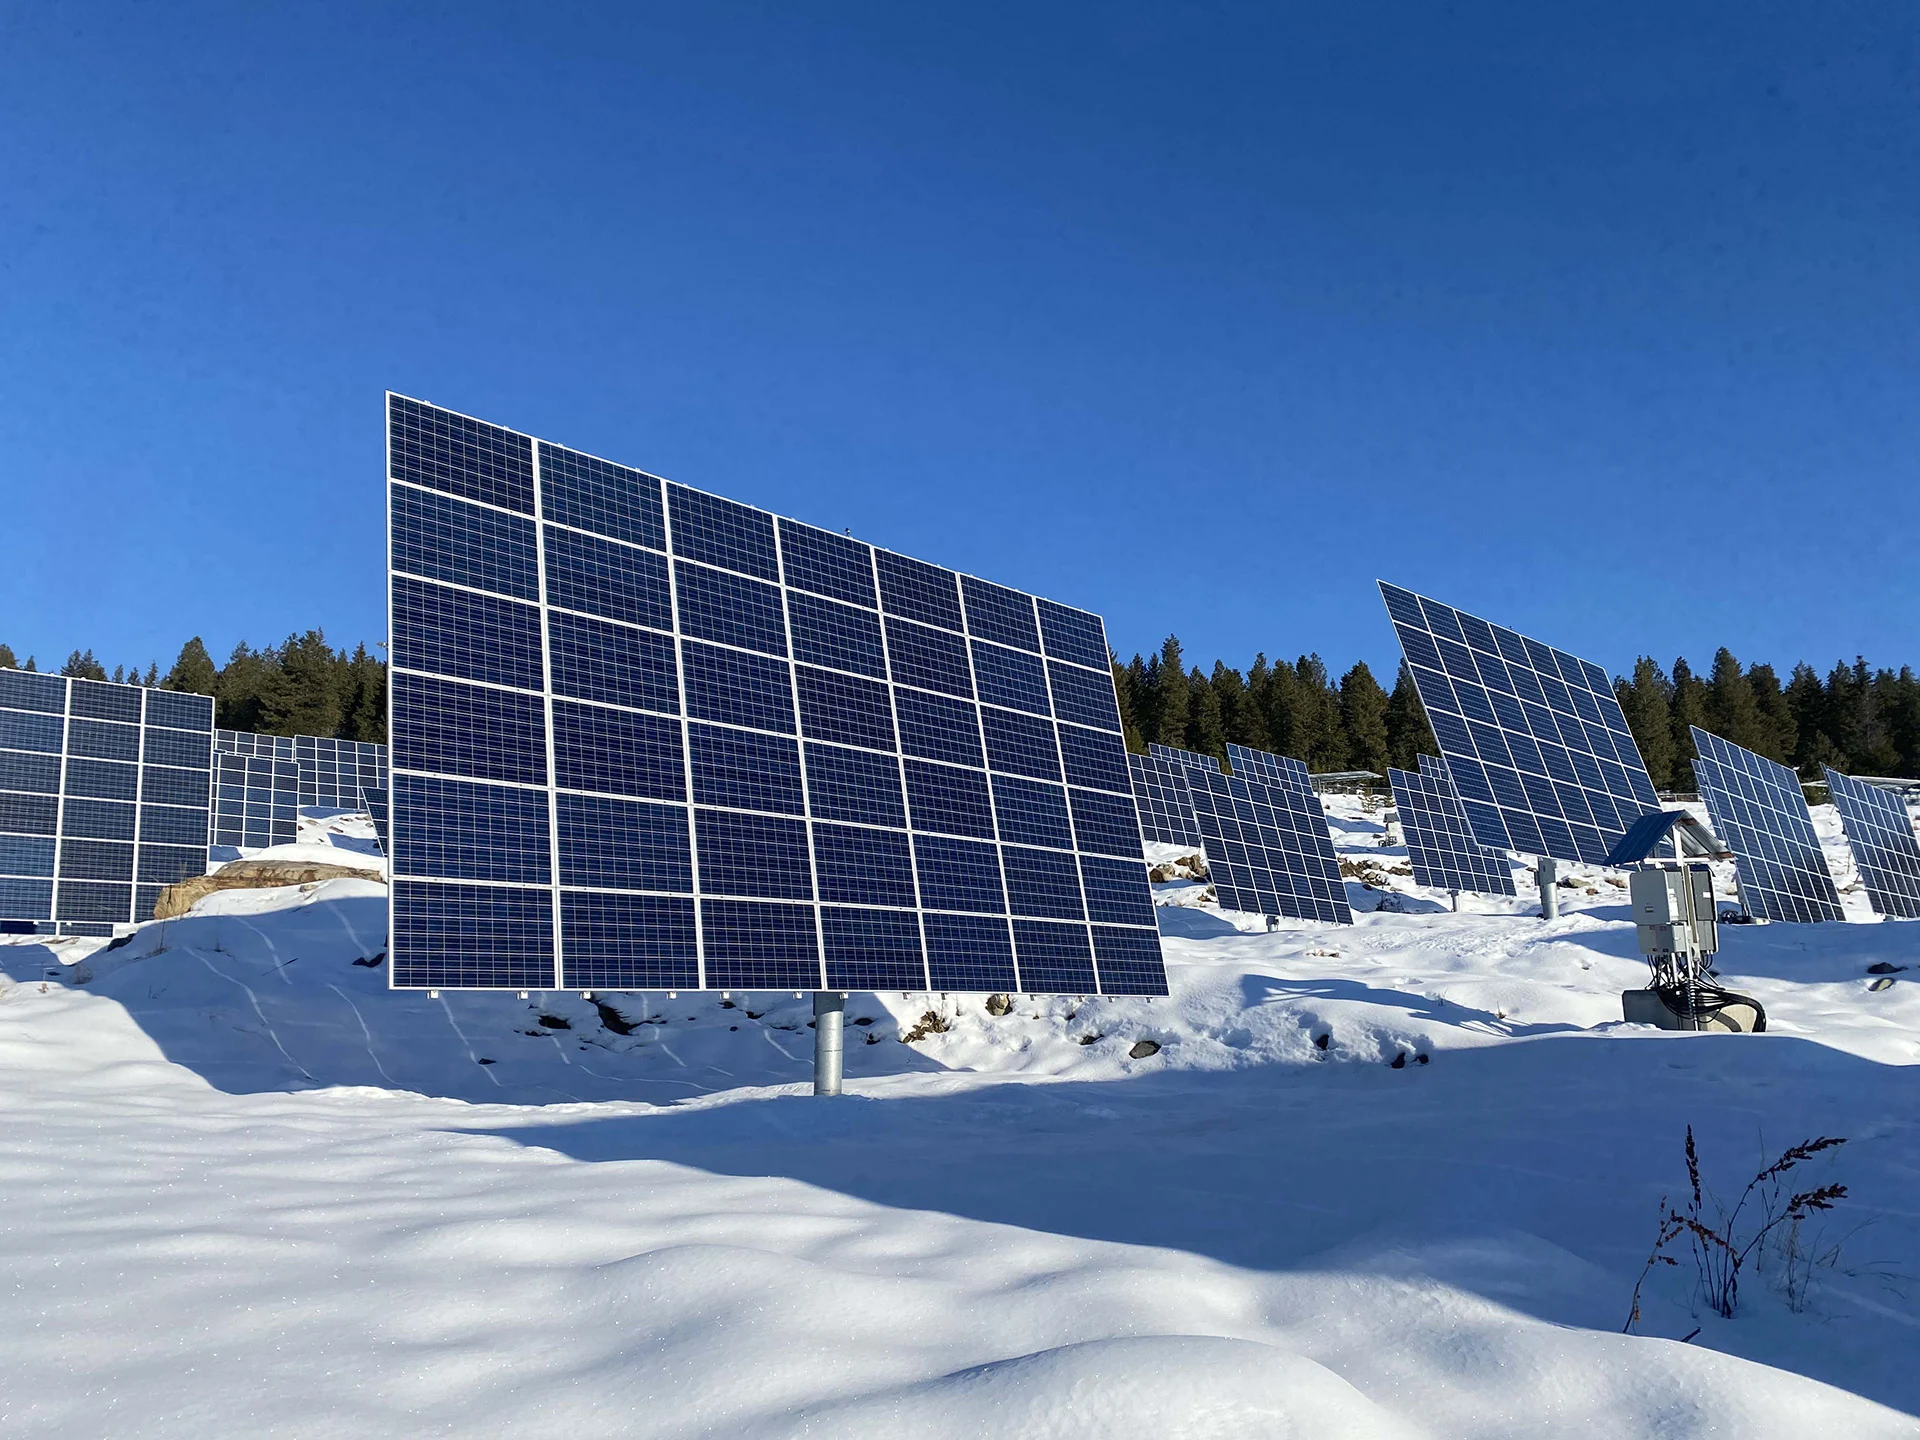 This former mining town is a solar-powered highlight on the ‘Powder Highway’